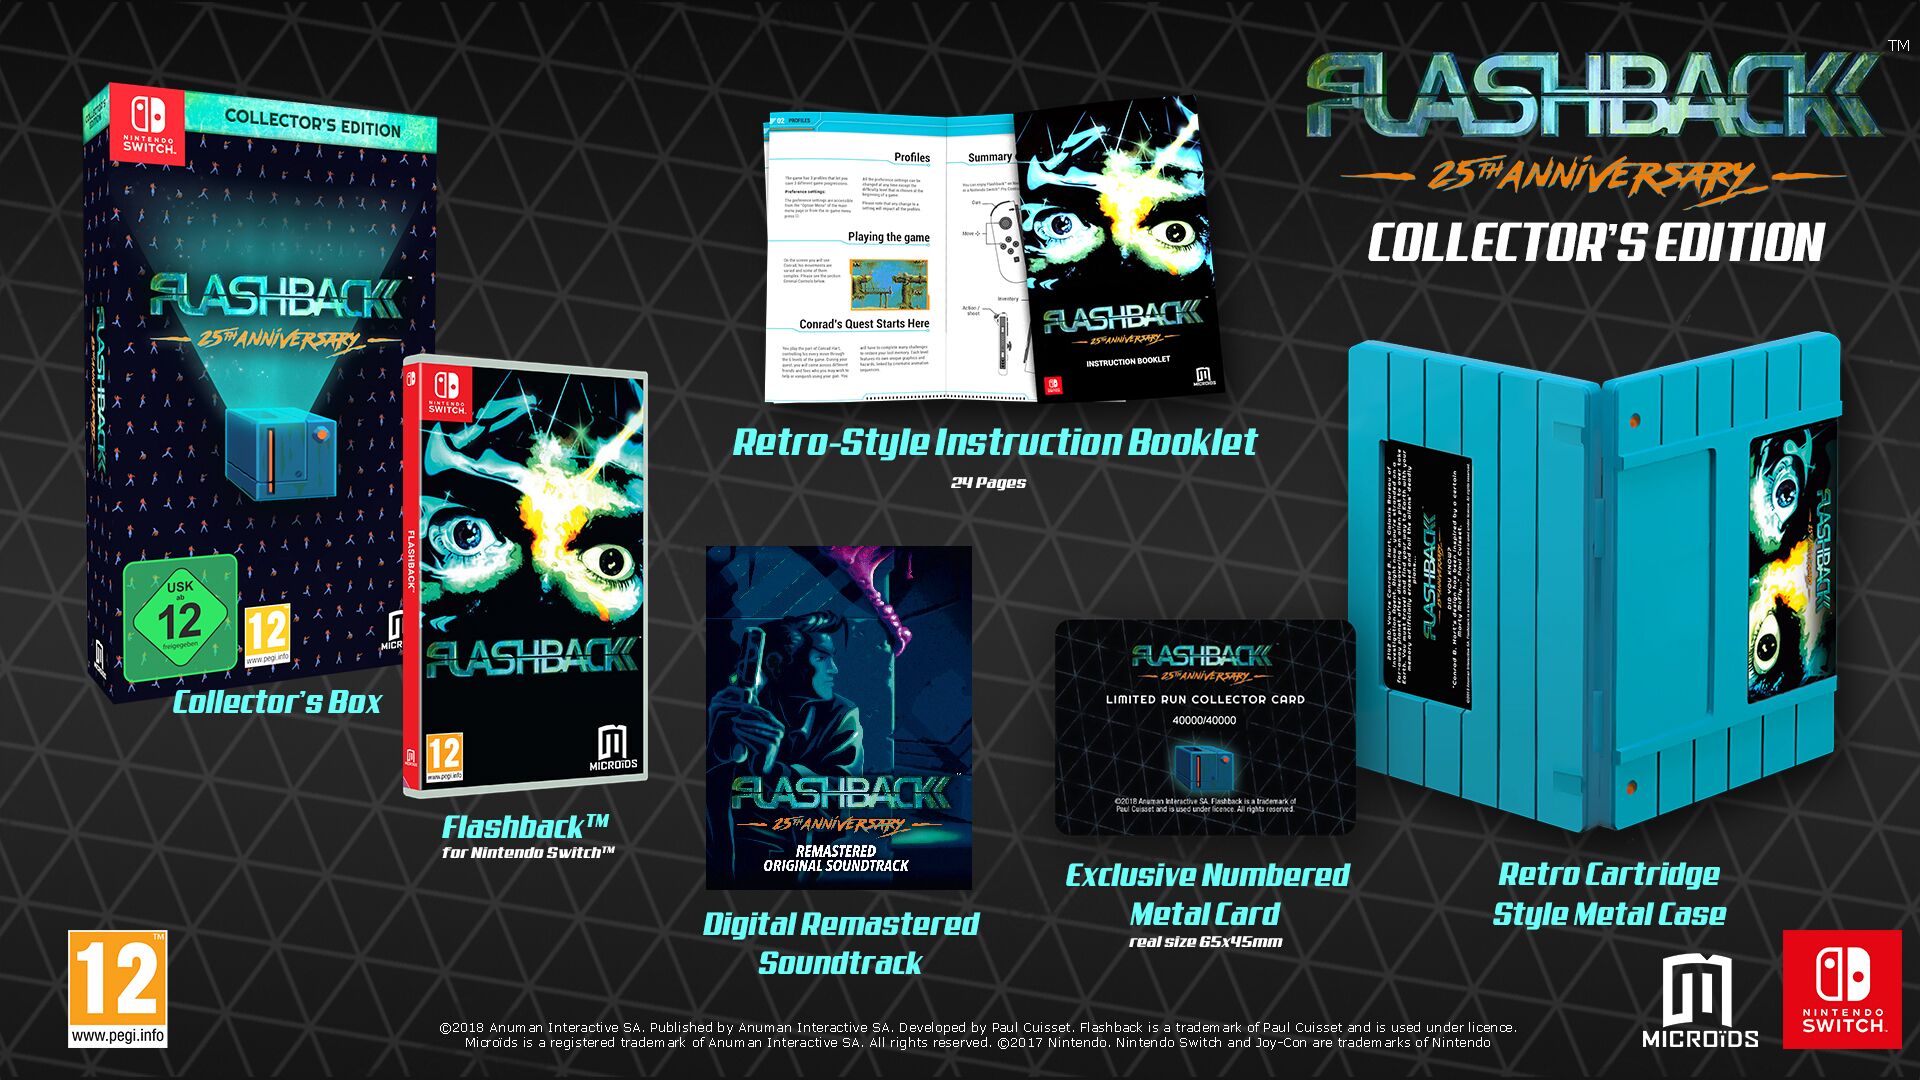 FLASHBACK 25th anniversary edition releasing July 31st in retro cartridge case